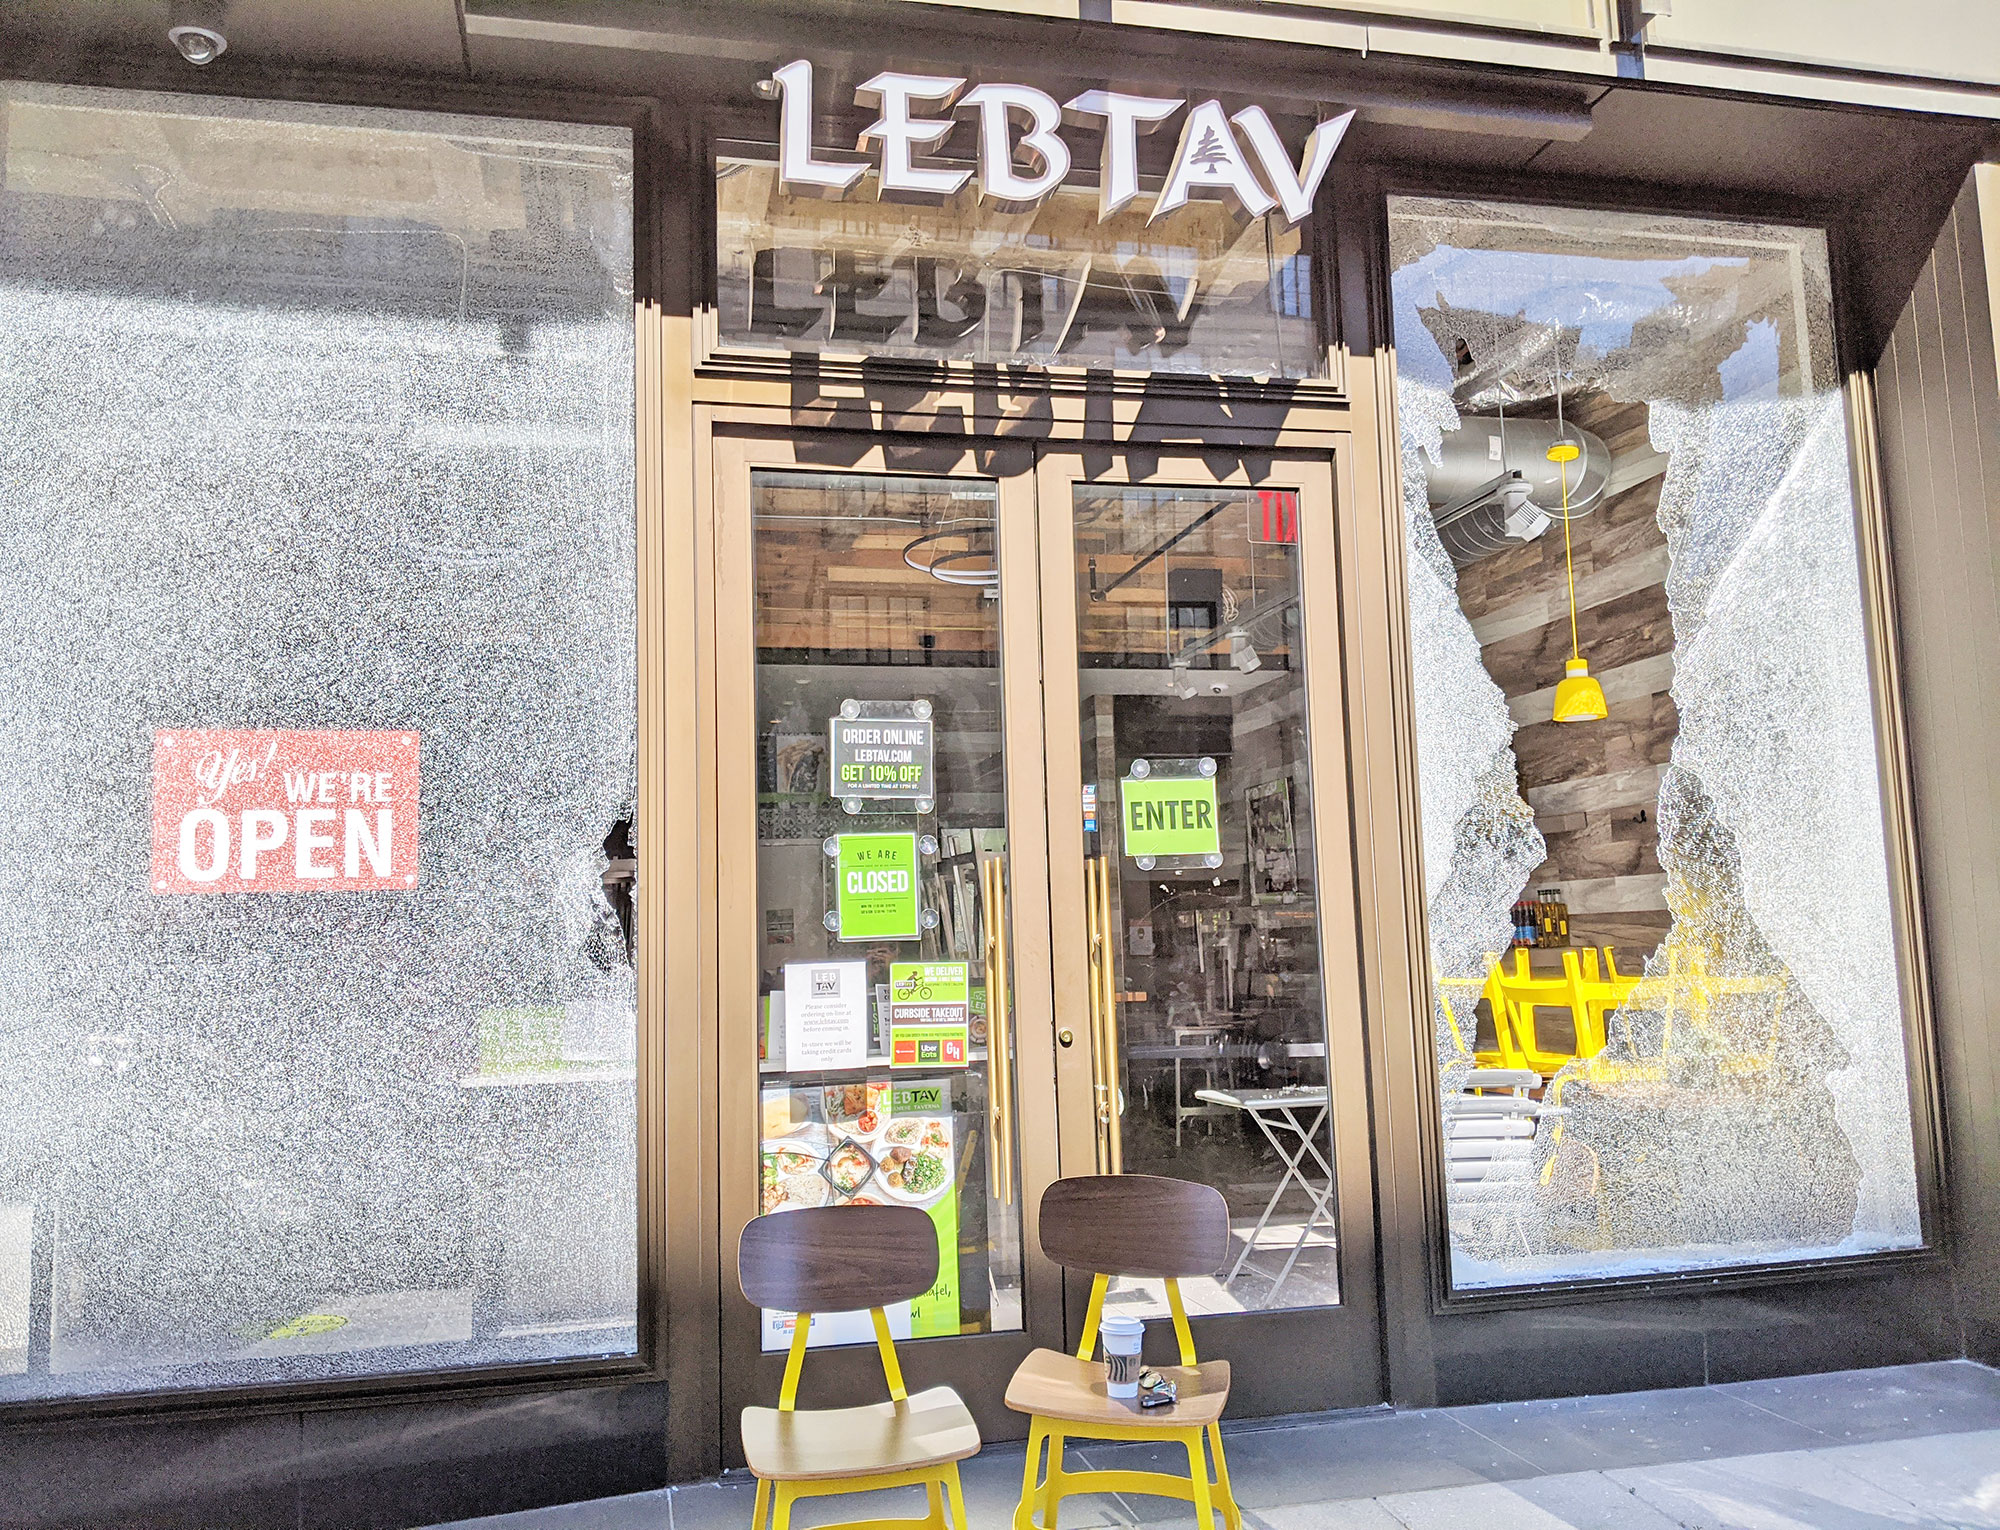 Lebanese Taverna with its windows smashed out during the George Floyd protest in Washington D.C.